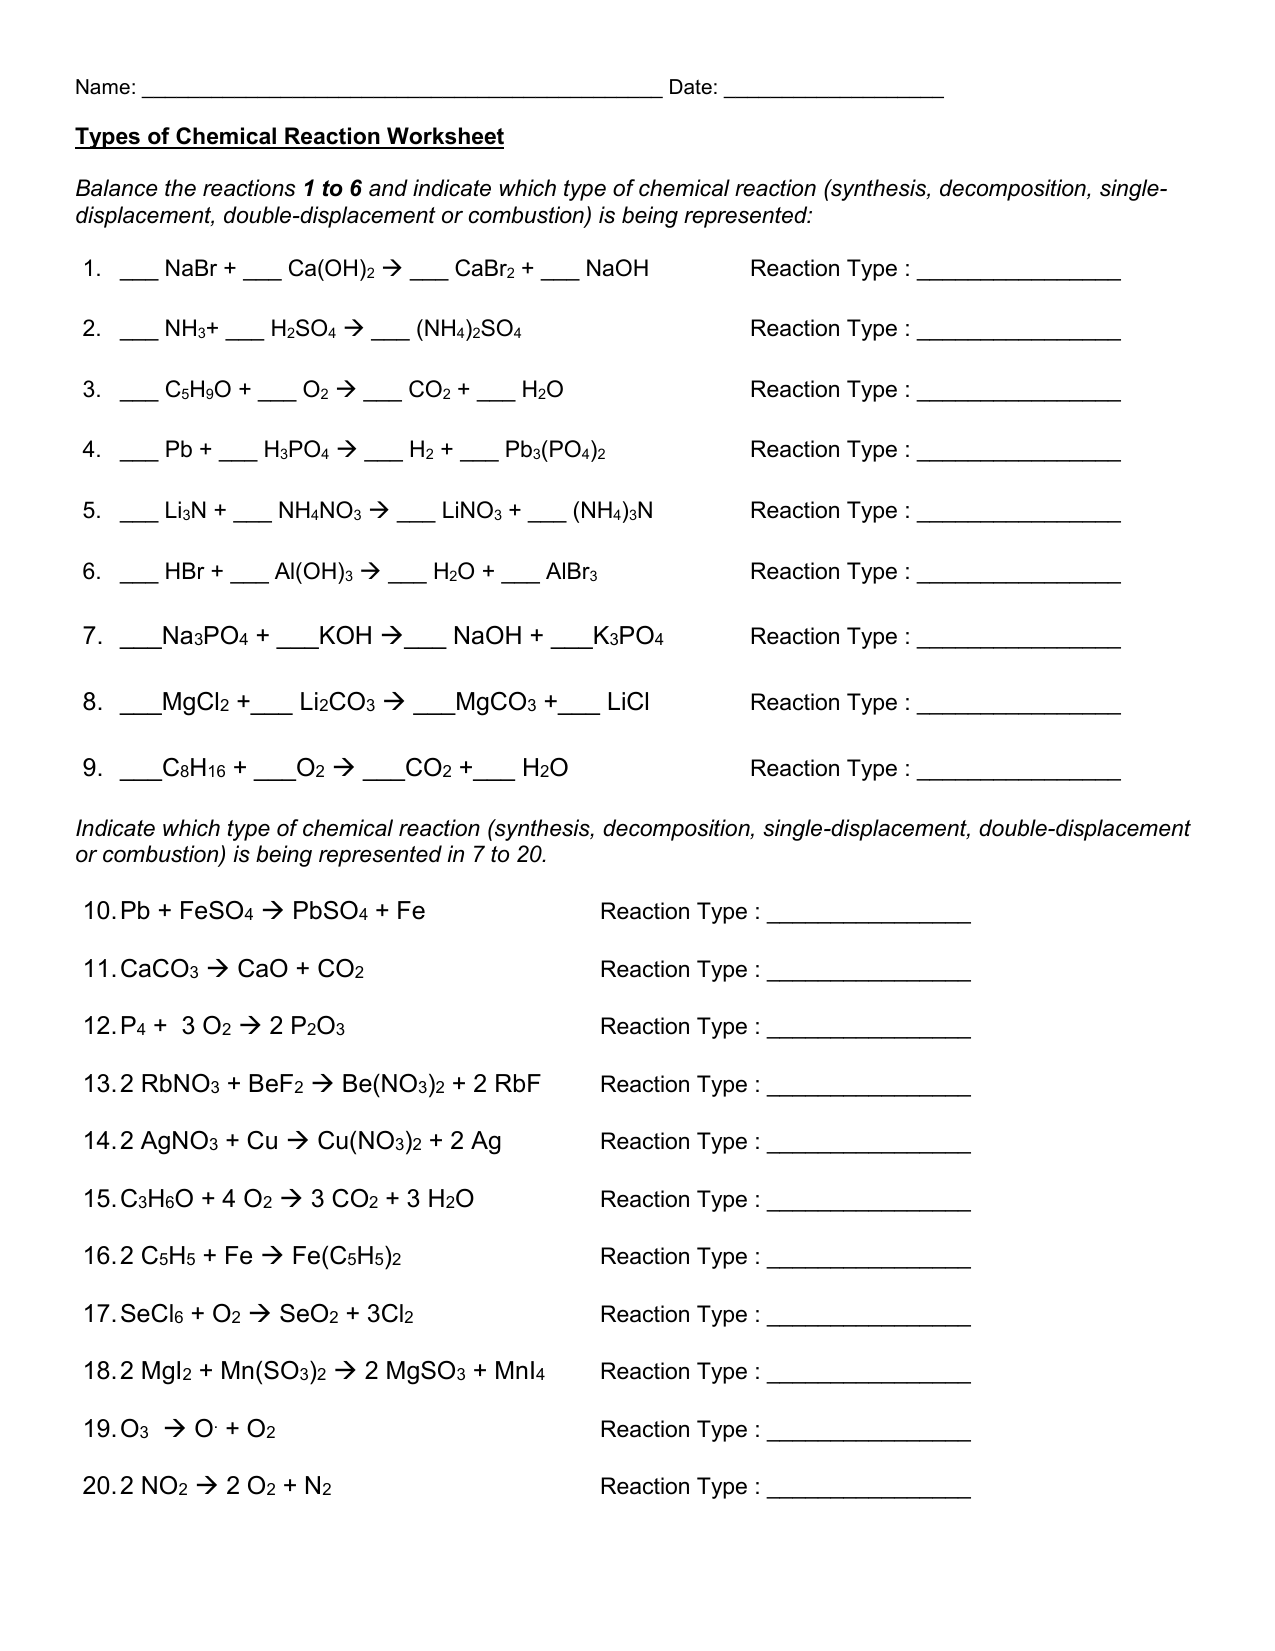 Types of Chemical Reaction Worksheet Pertaining To Chemical Reactions Types Worksheet